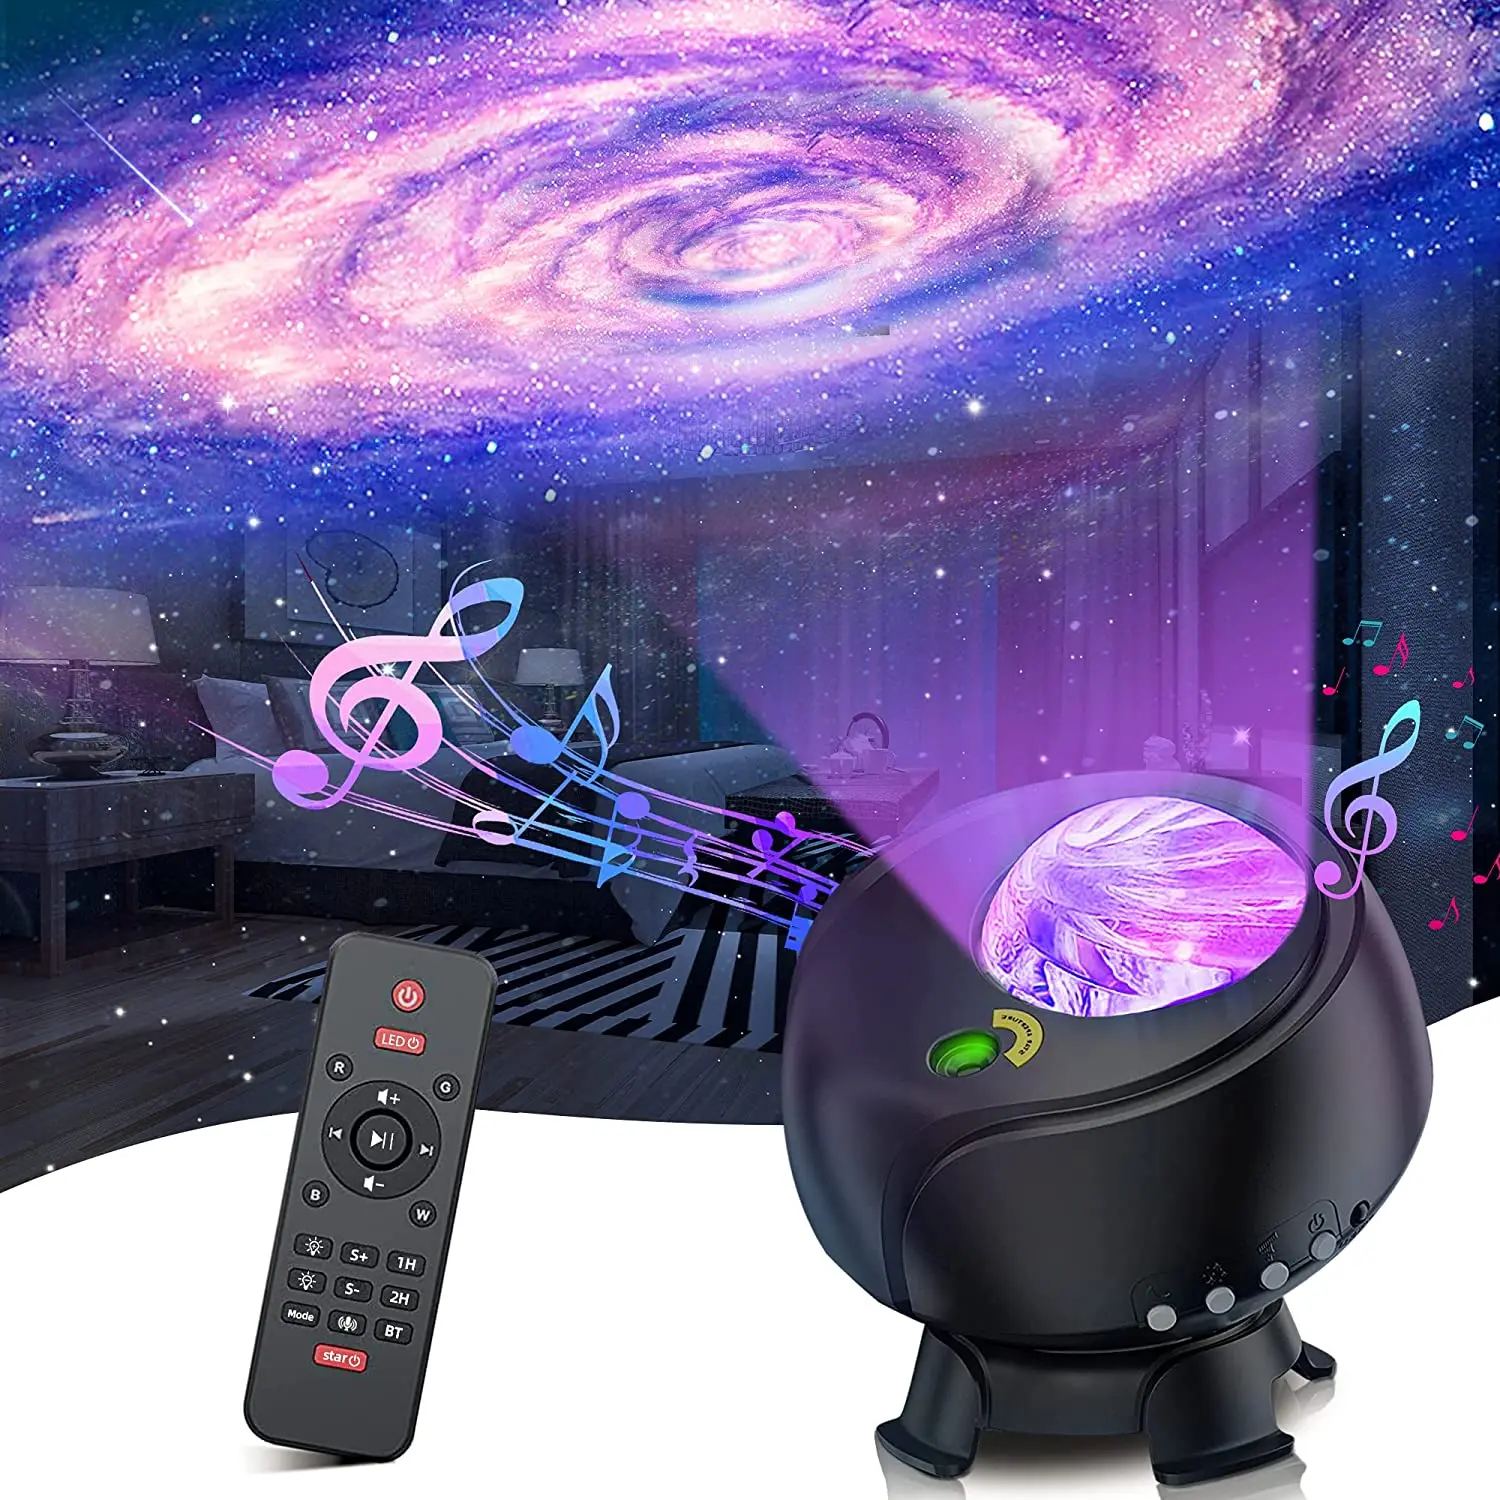 Galaxy Projector Light, Star Projector Night Light Bluetooth Speaker Starry  Light Projector for Mother's Day Gift Decor Party Ceiling, Work with Alexa